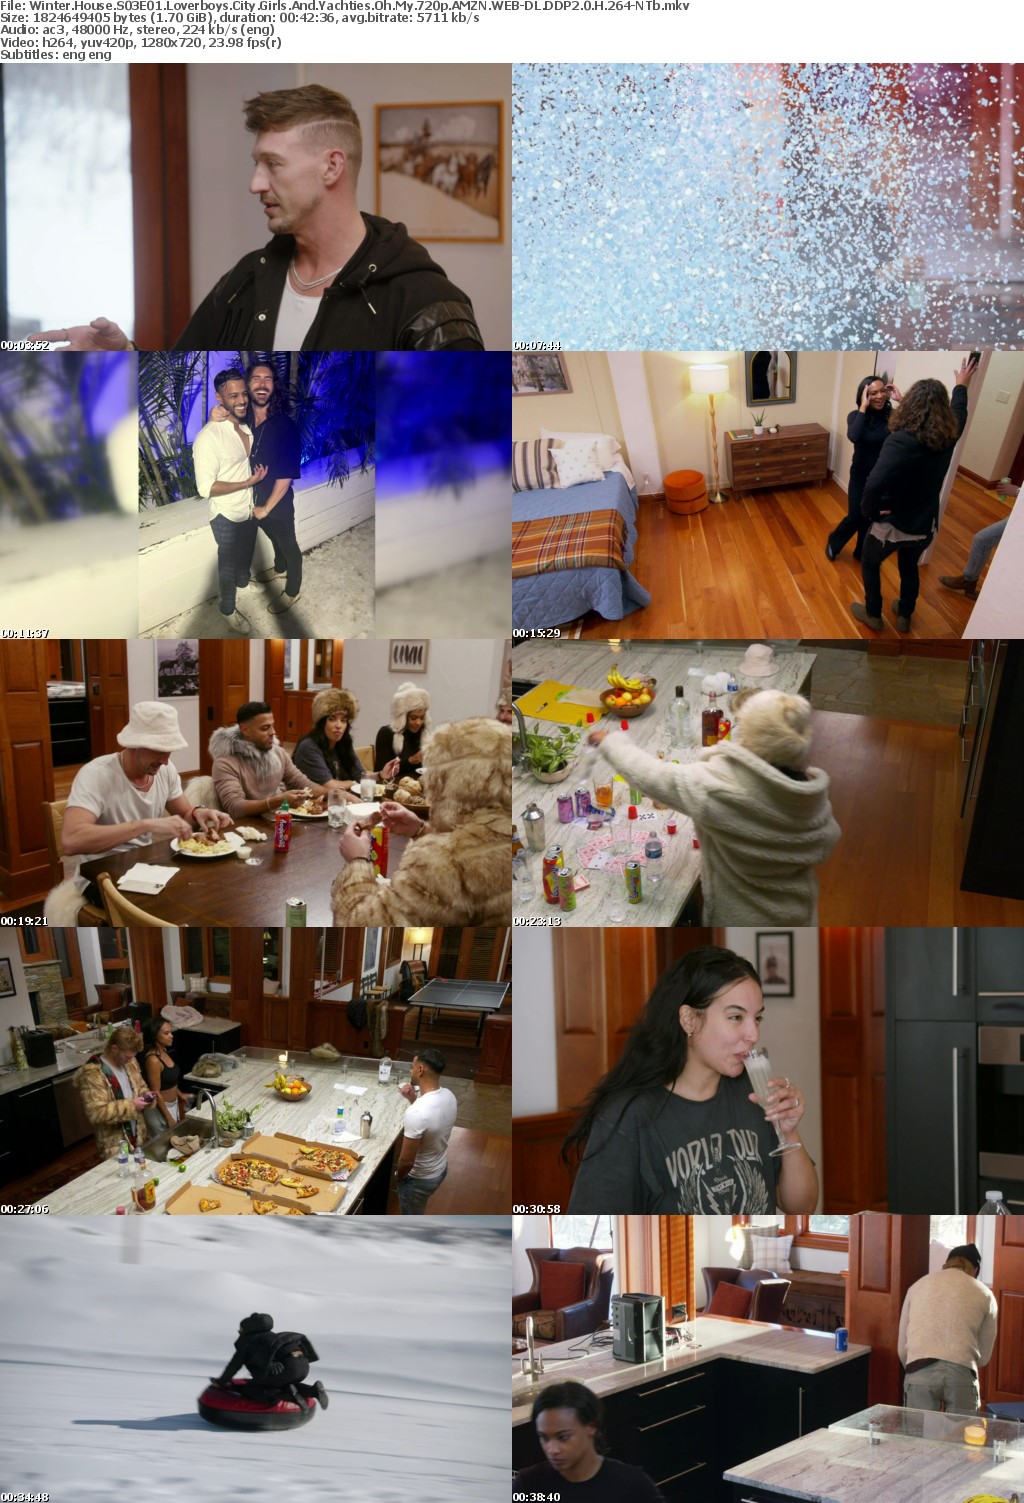 Winter House S03E01 Loverboys City Girls And Yachties Oh My 720p AMZN WEB-DL DDP2 0 H 264-NTb